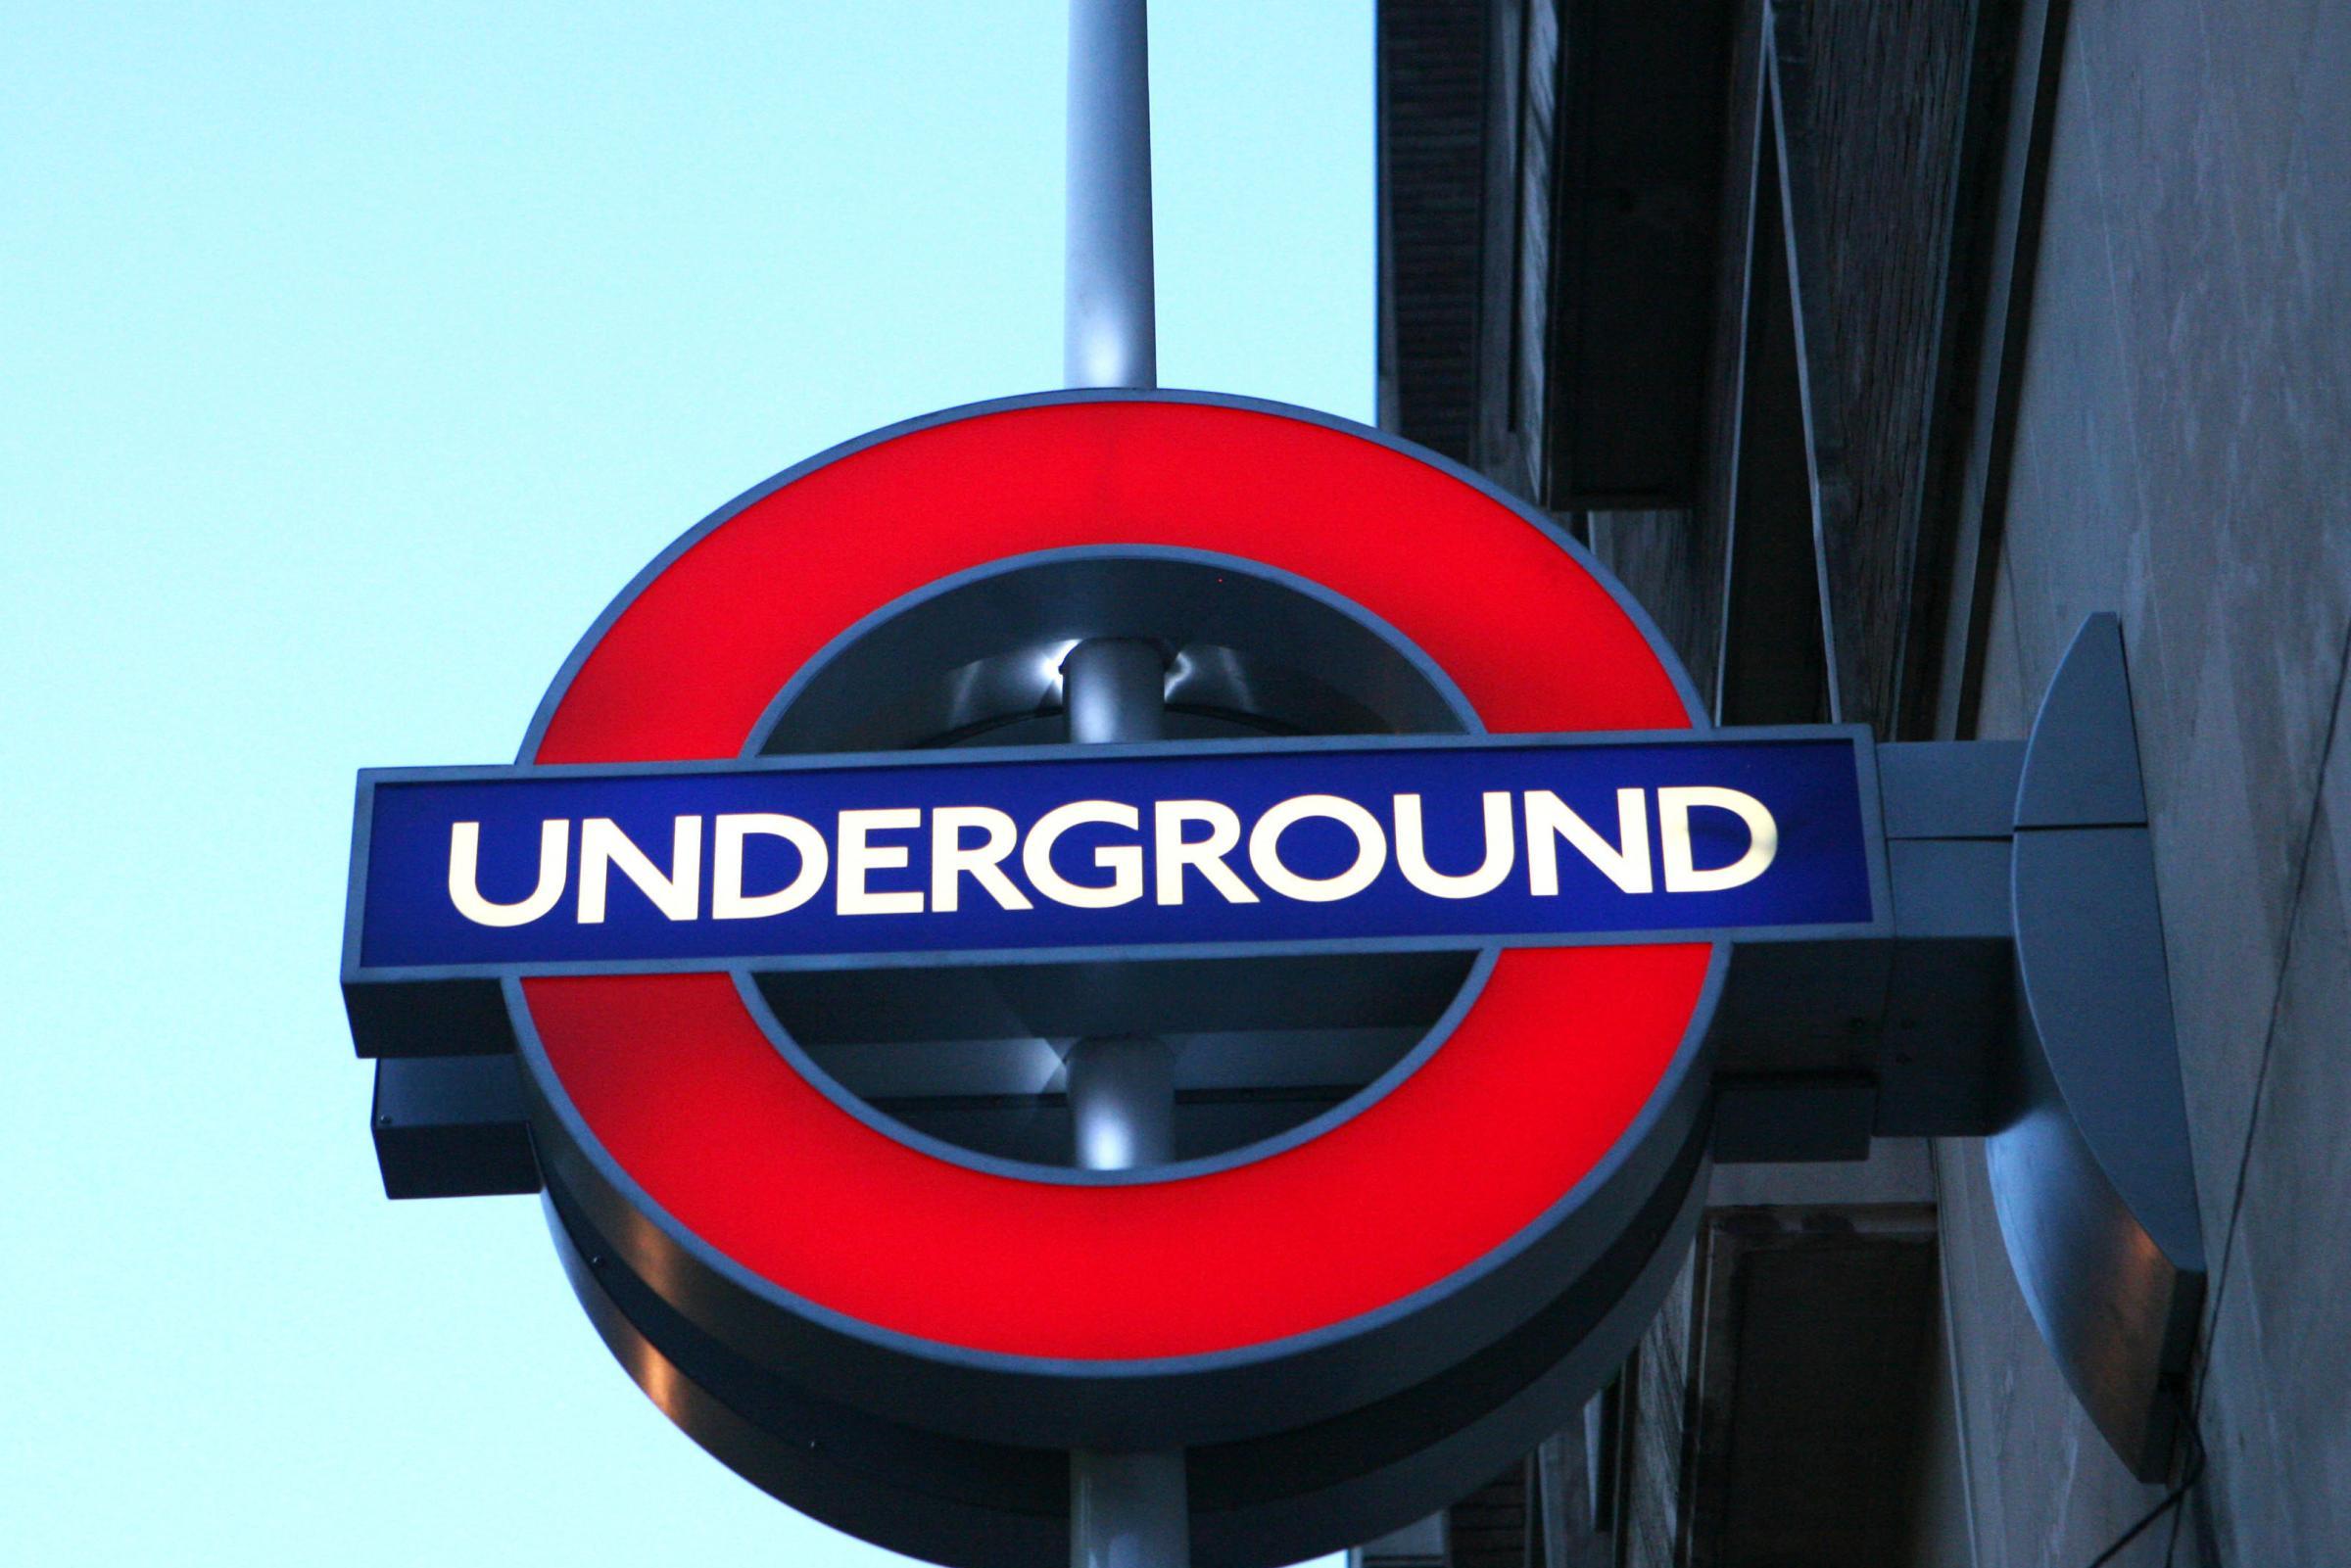 Violent crime on Tube up by more than 40 per cent over last three years